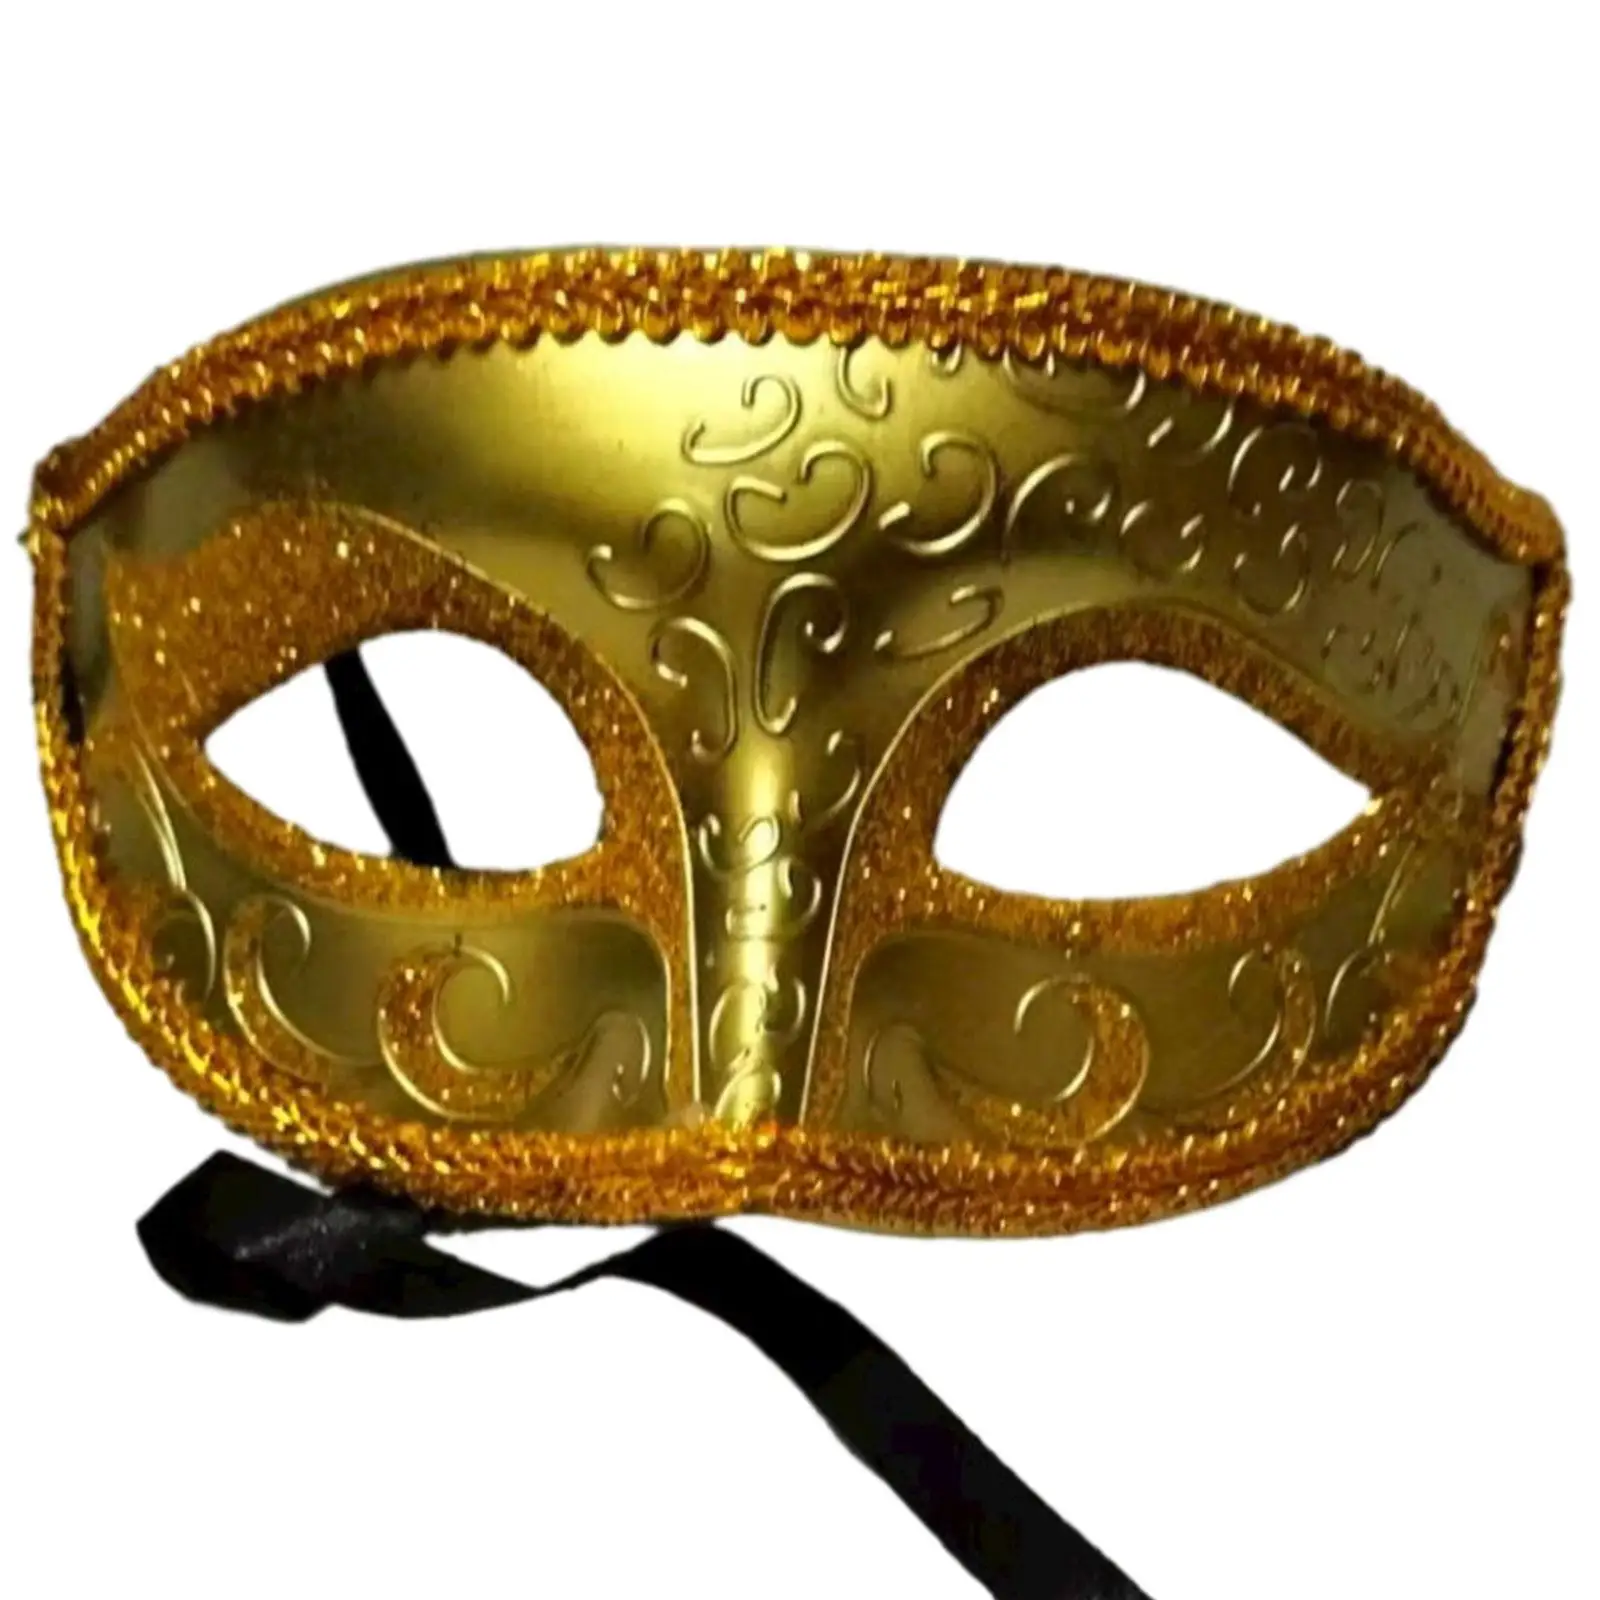 Masquerade Mask Prom Mask for Women Men Eye Mask Props Half Face Mask for Club Dancing Dress up Festival Roles Play